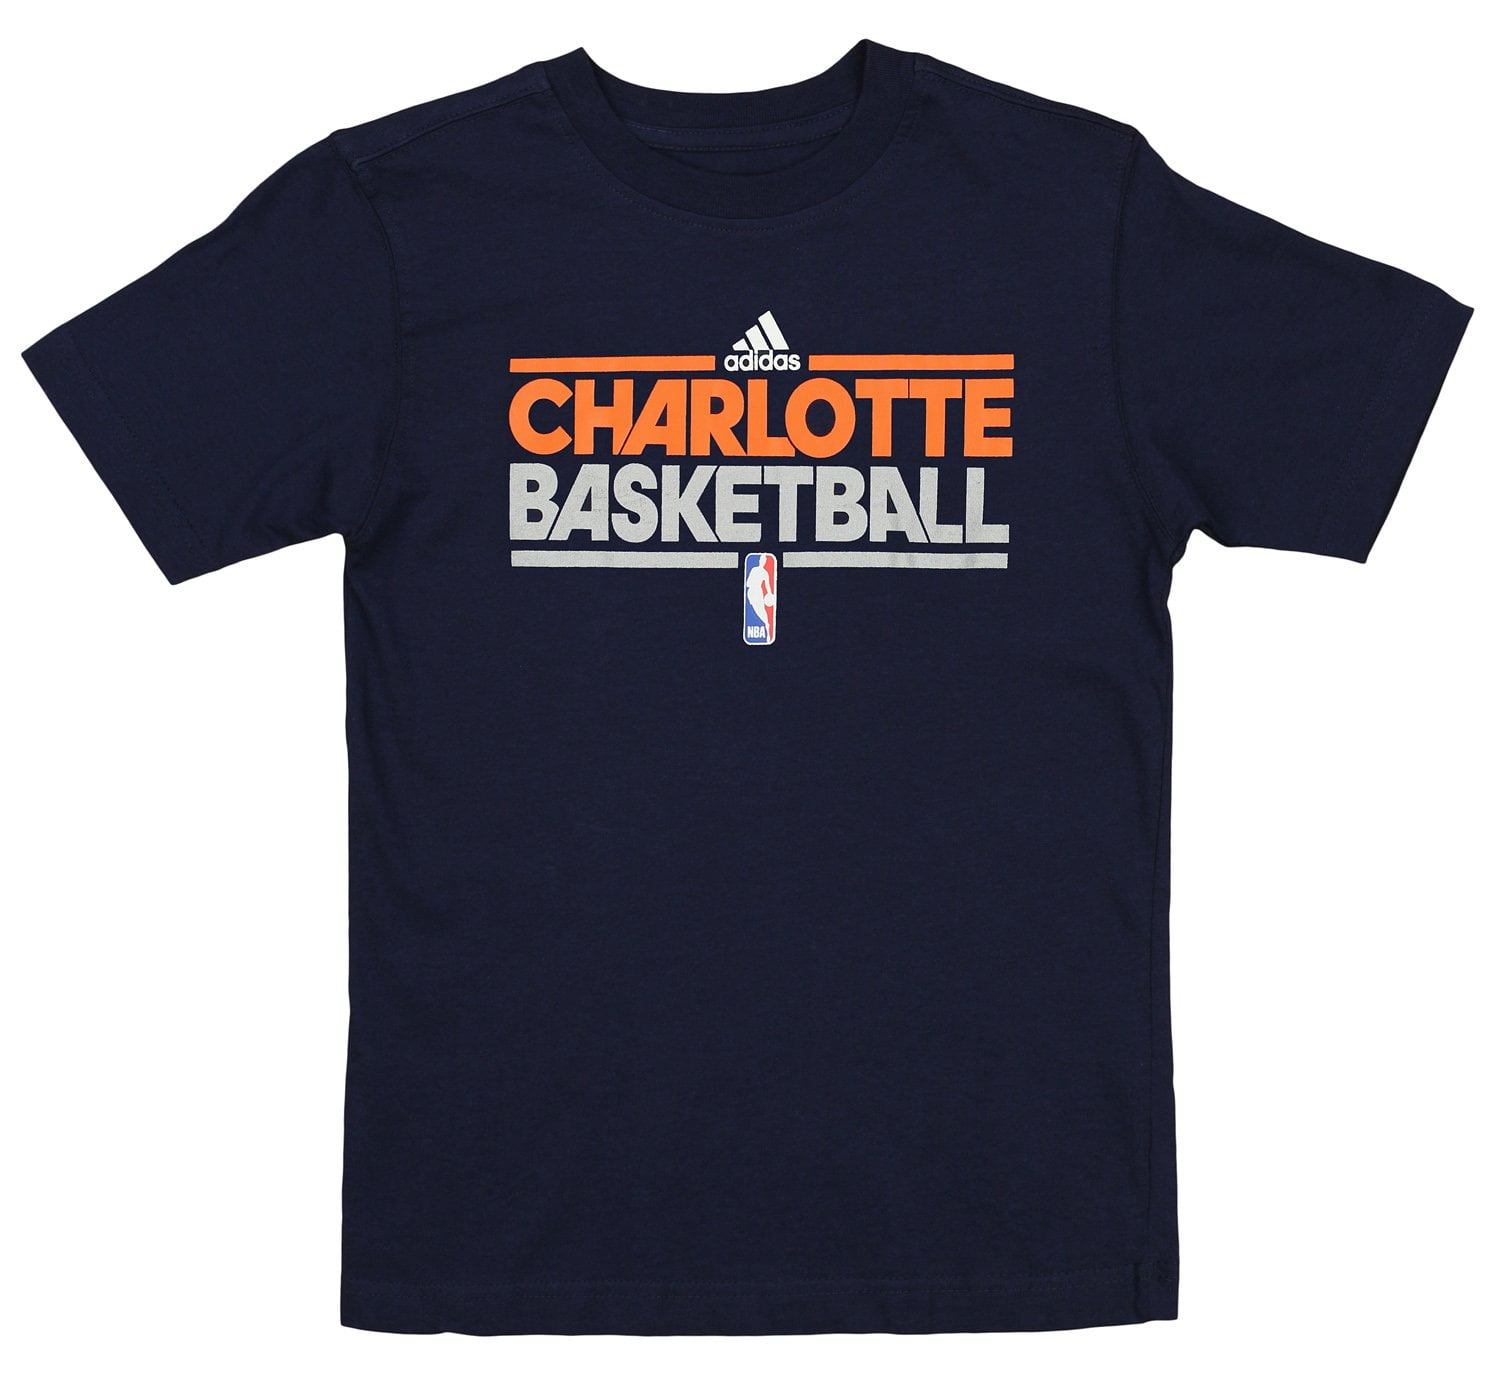 Charlotte Bobcats Accessories for Sale